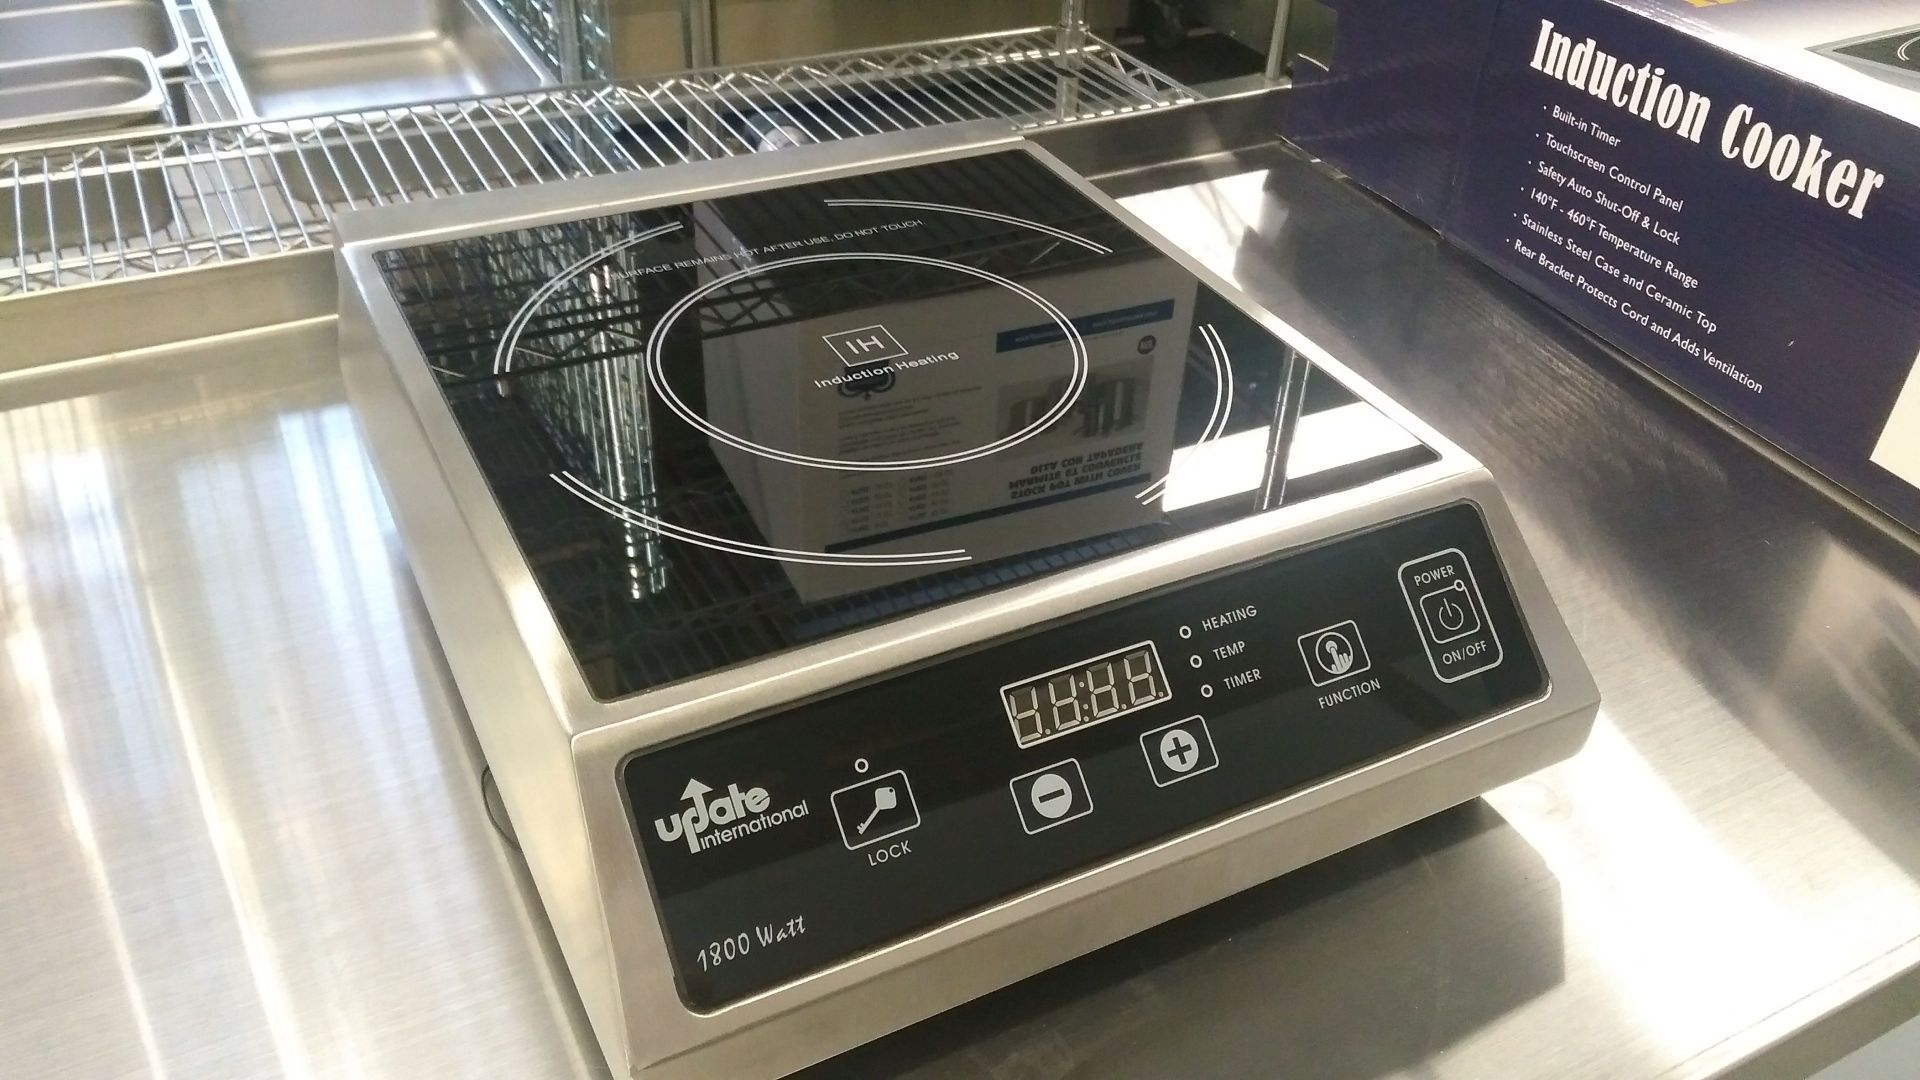 Update IC-1800WN Countertop Commercial Induction Cooktop - Image 2 of 4